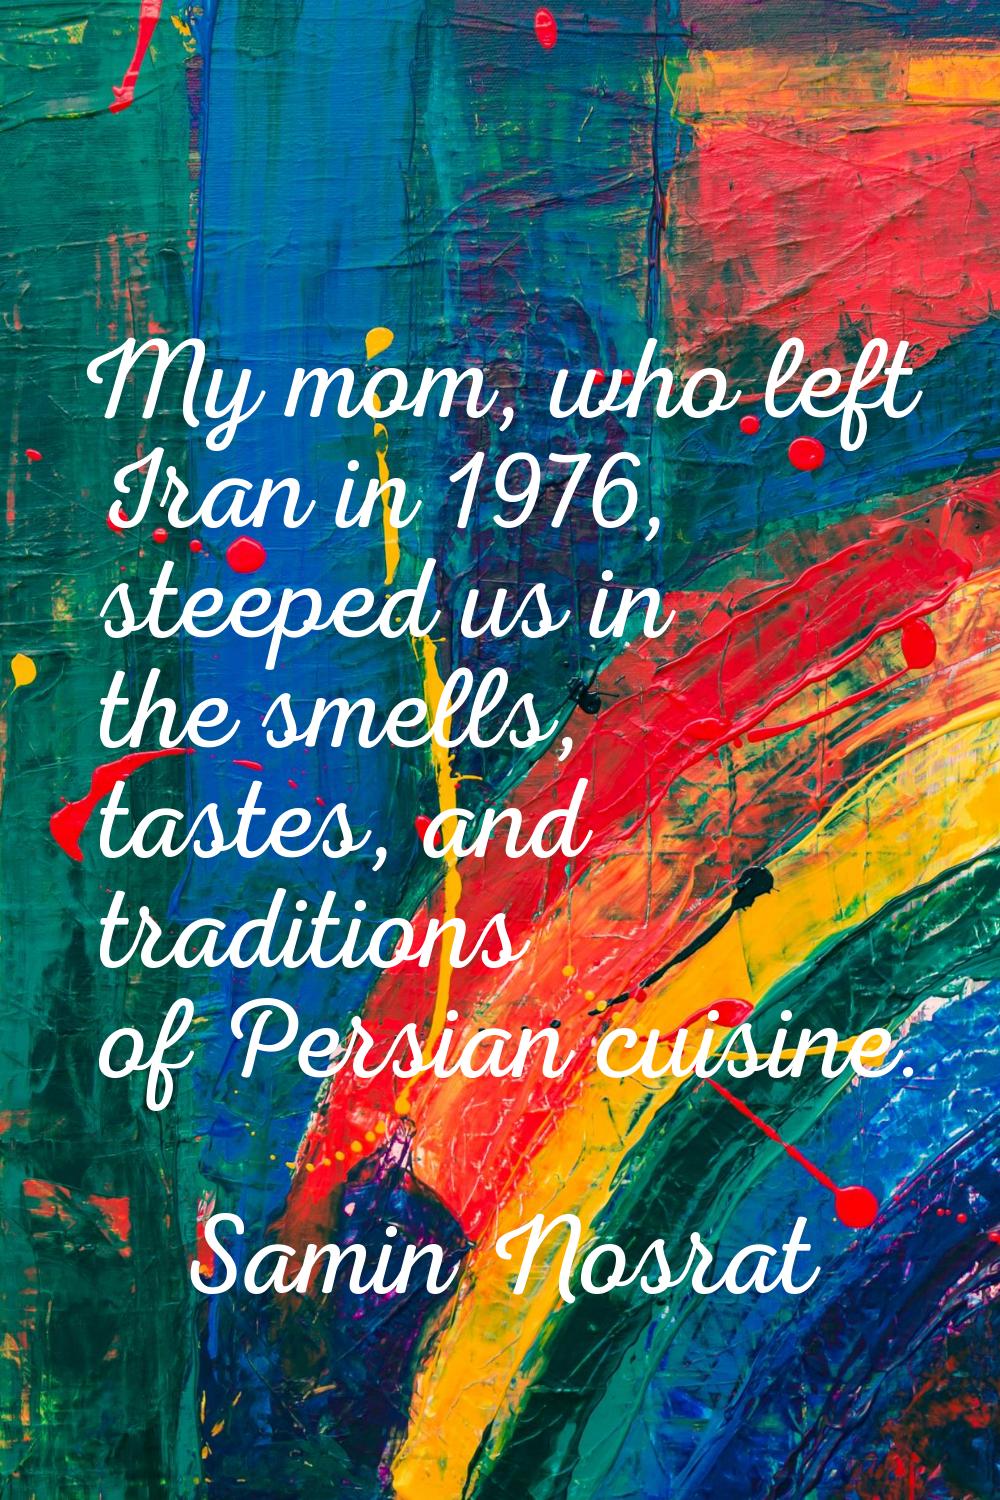 My mom, who left Iran in 1976, steeped us in the smells, tastes, and traditions of Persian cuisine.